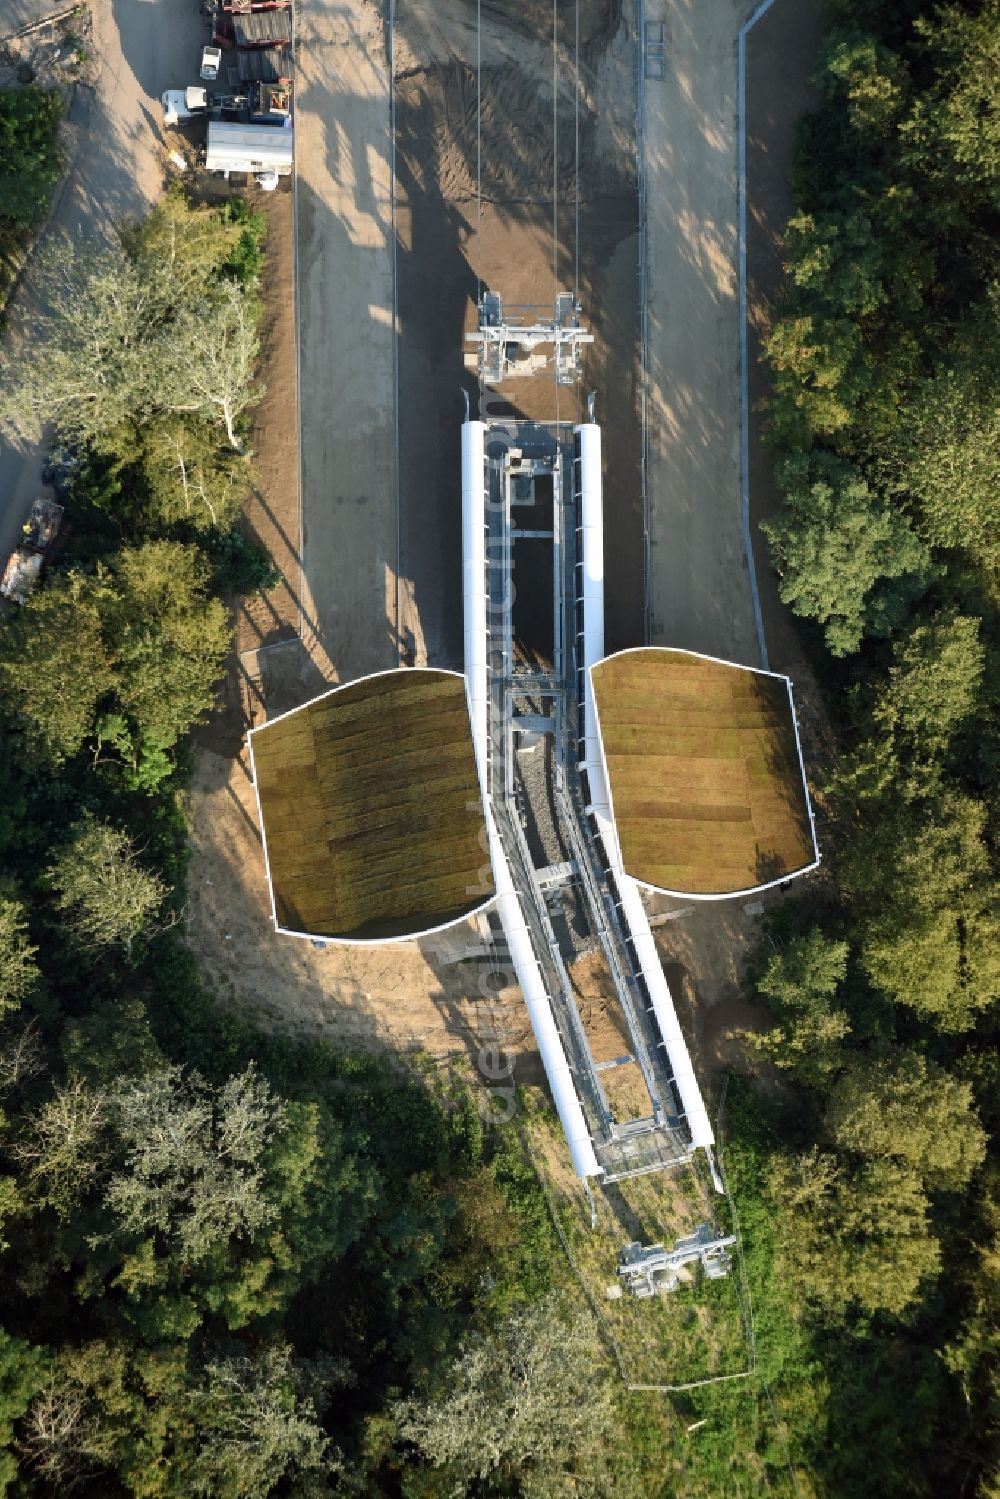 Aerial photograph Berlin - Cable car station and construction works on Kienberg hill on the premises of the IGA 2017 in the district of Marzahn-Hellersdorf in Berlin, Germany. The station and stop is part of a panoramic cable car route connecting the western and eastern entrance of the IGA garden show premises